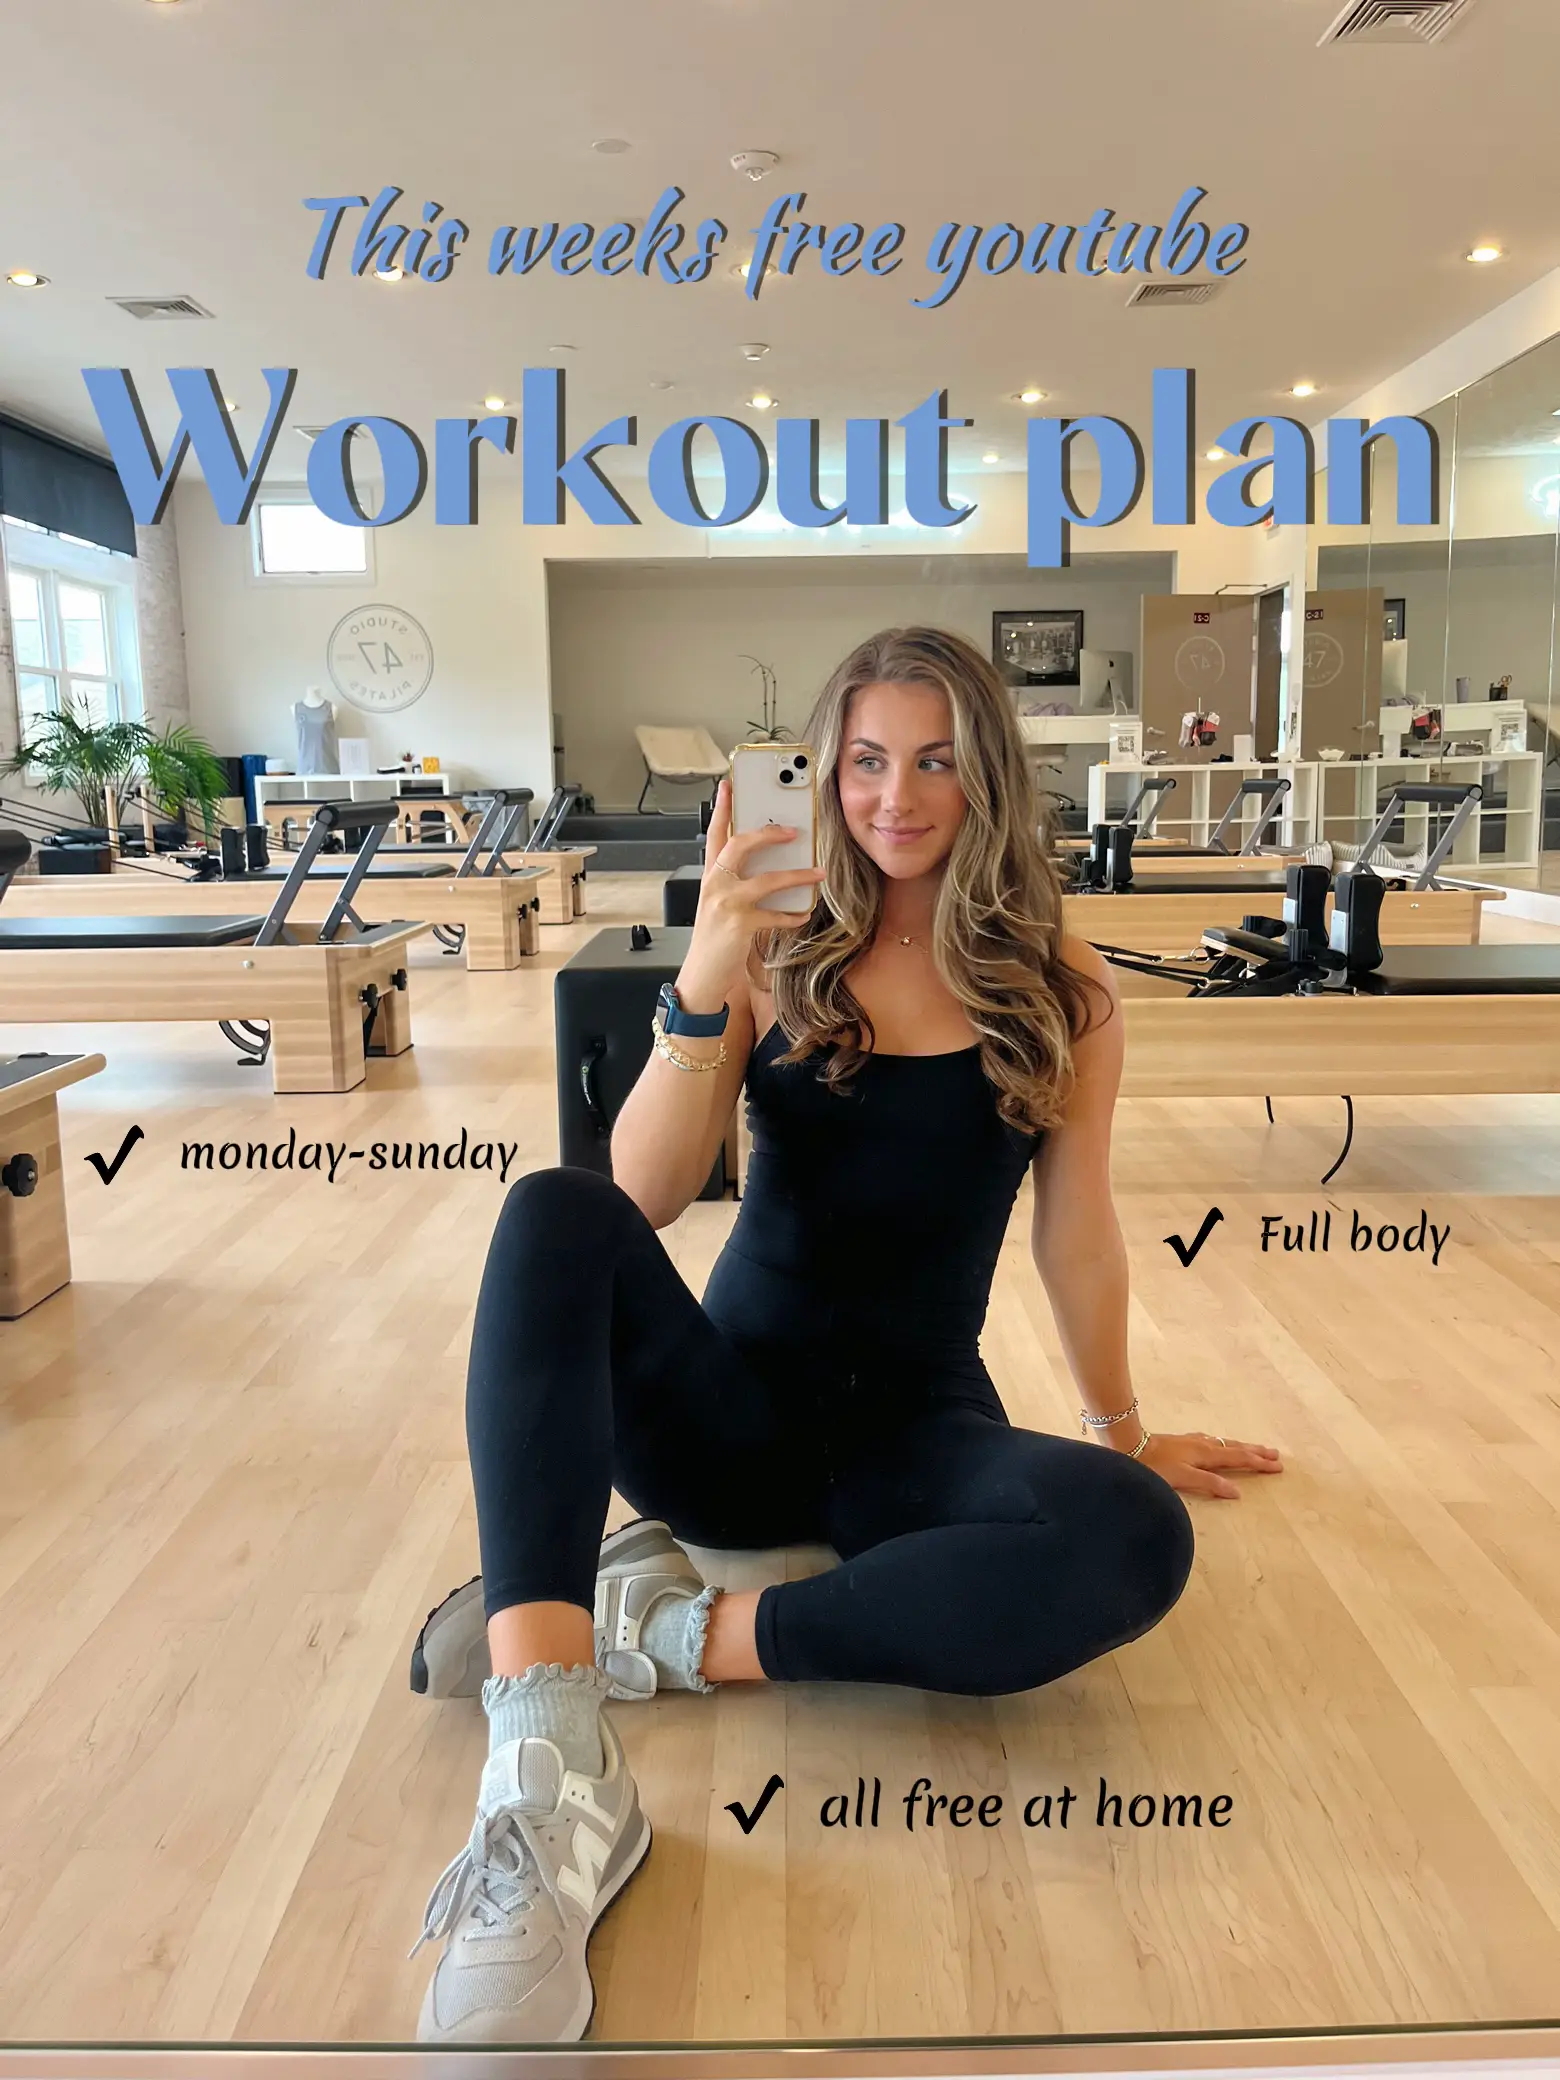 Full body Pilates/barre workout ✨💗 perfect to get moving after